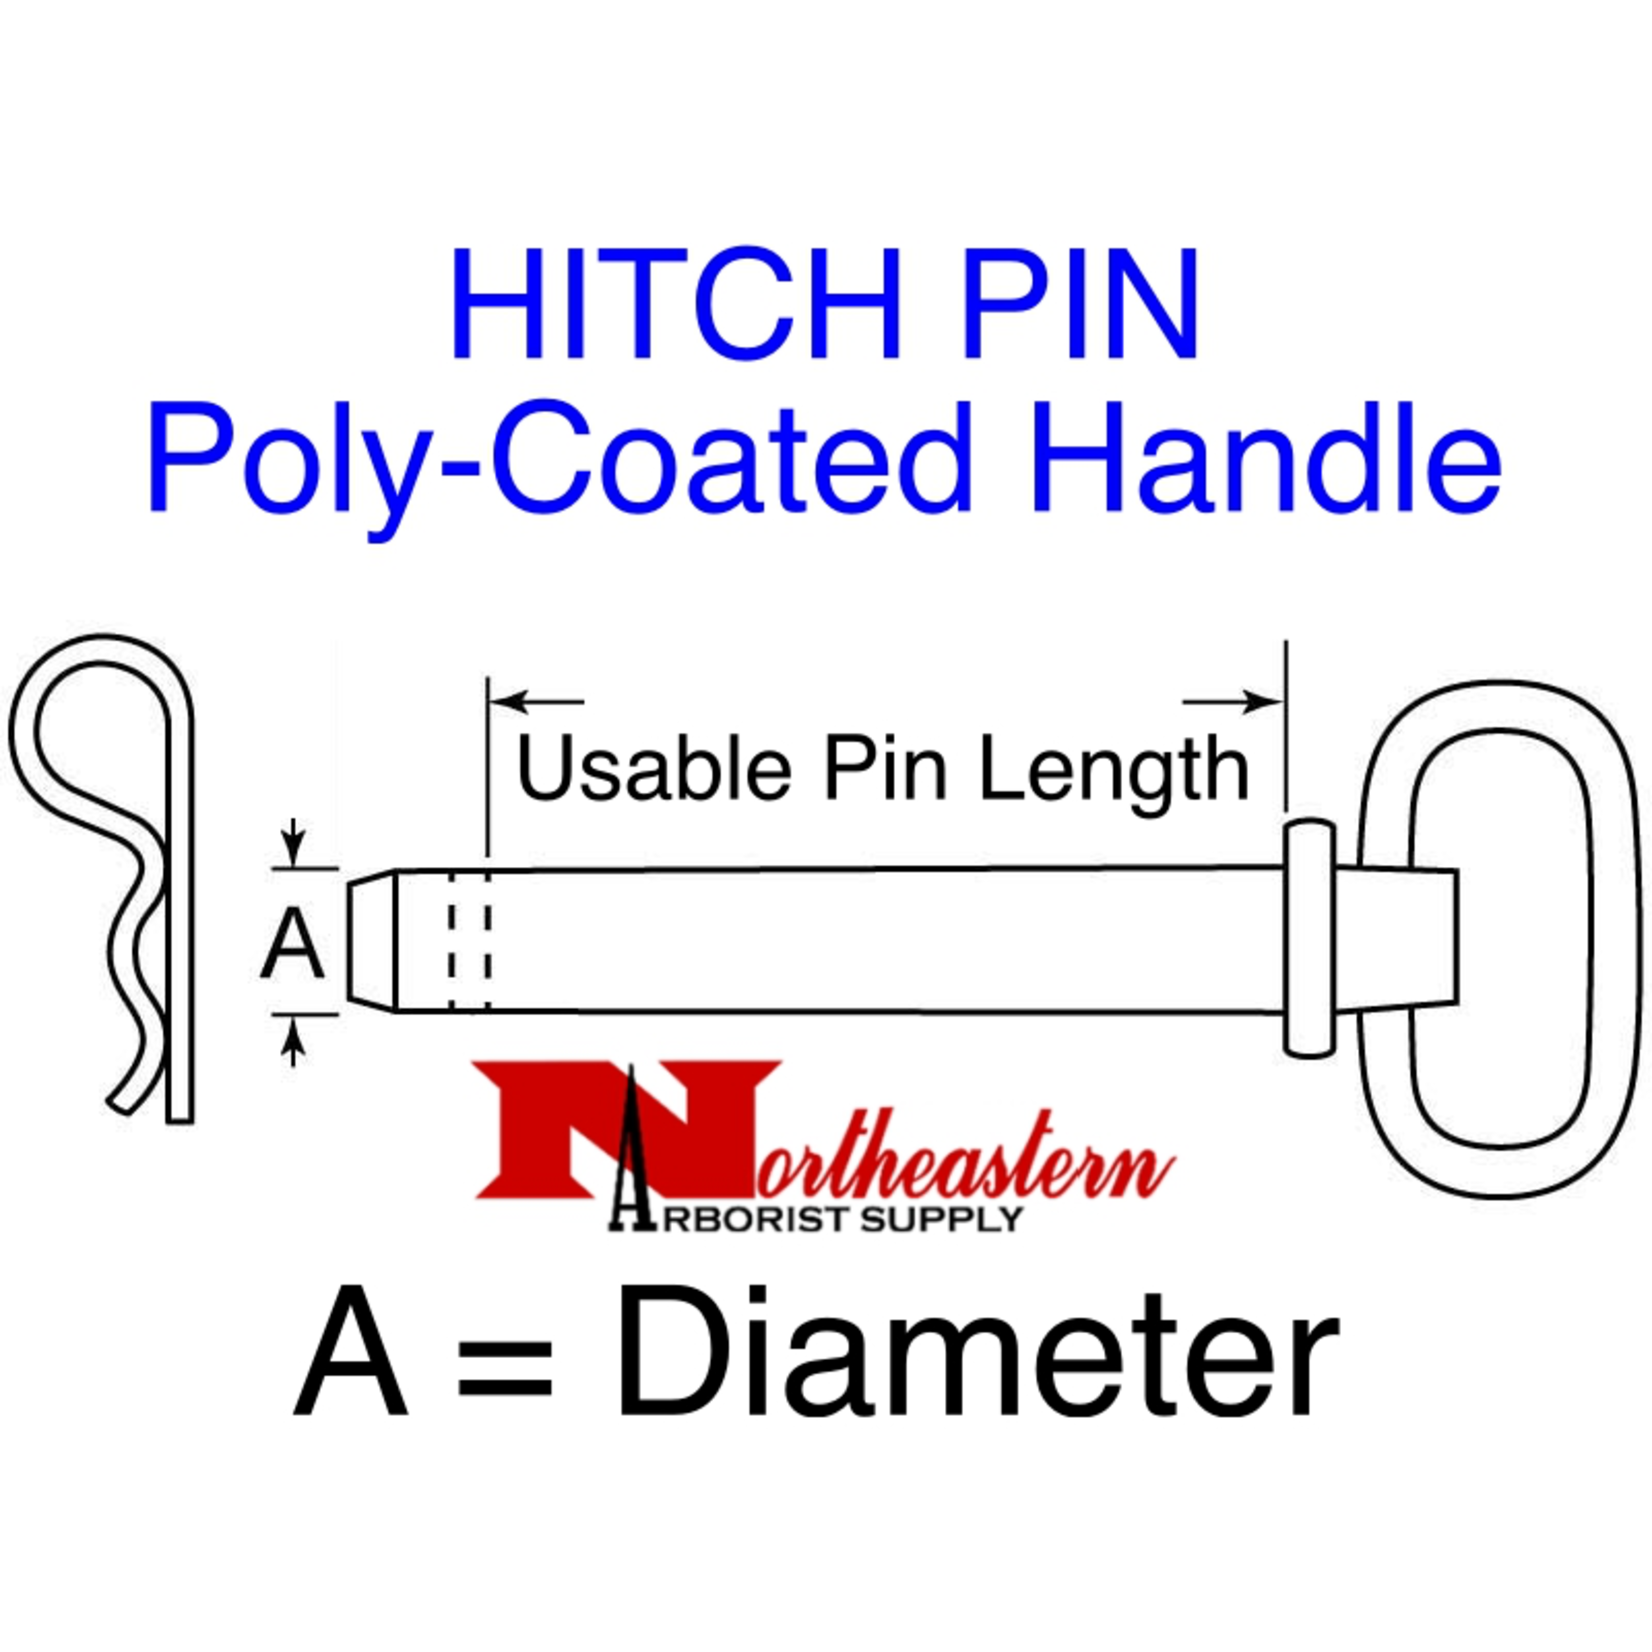 Buyers Hitch Pin, Poly-Coated Handle, Powder-Coated Steel Shank, 3/4in X 4+1/2in